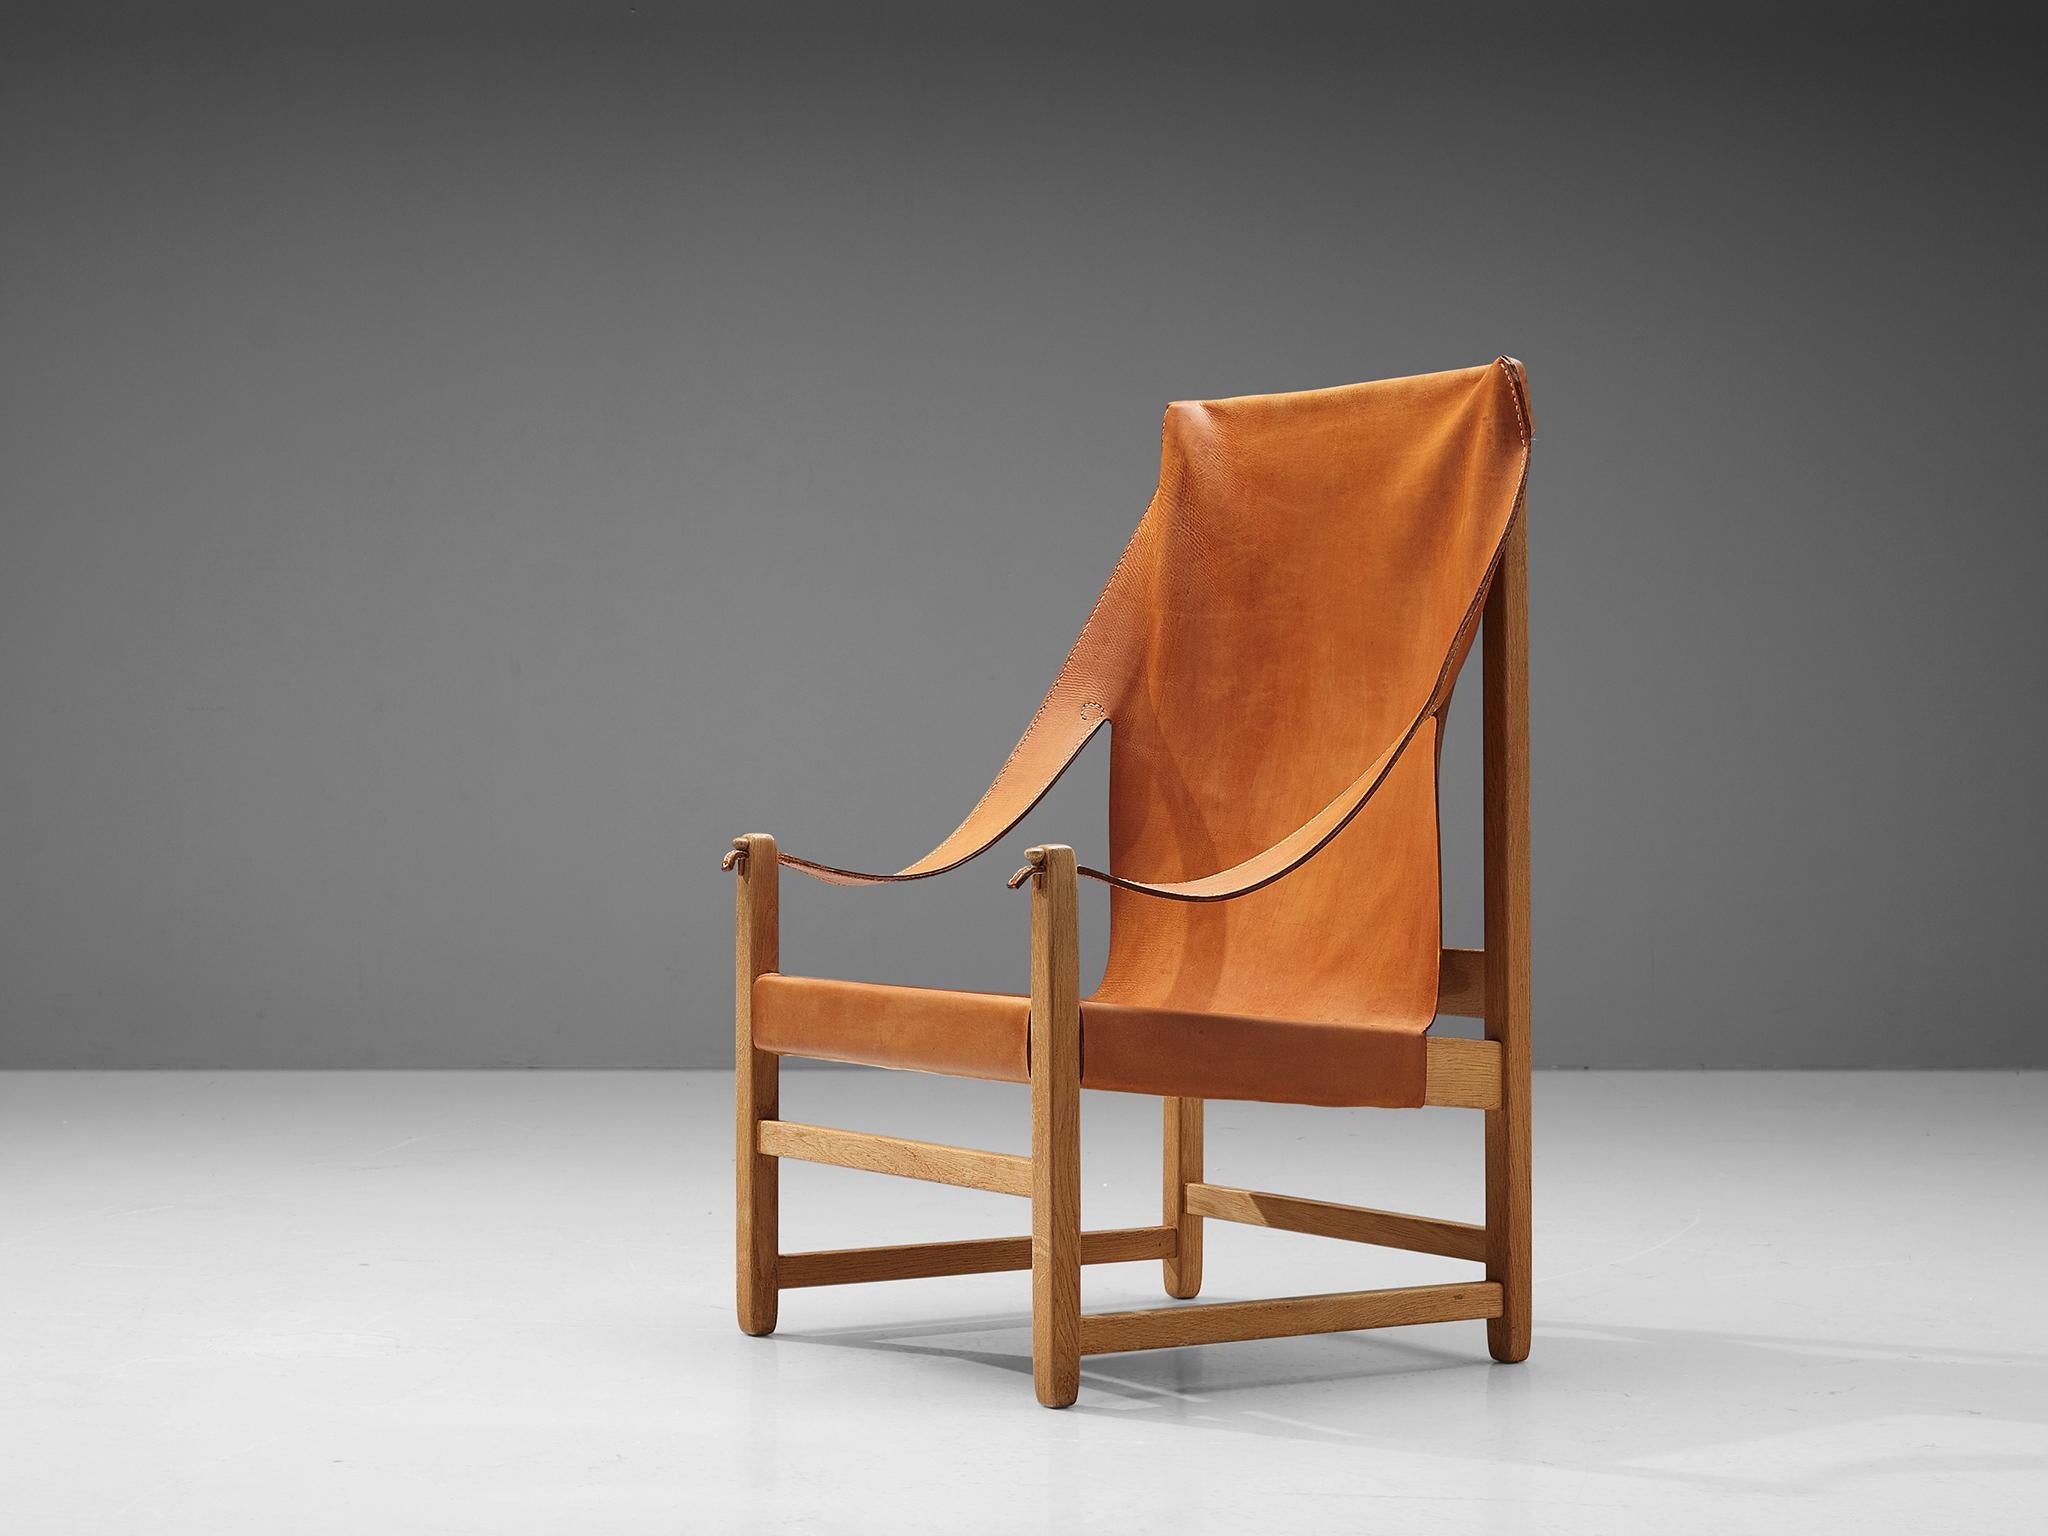 Grand armchair, oak and leather, Netherlands, 1960s.

Wonderful armchair with a majestically high back in solid oak and cognac saddle leather. The leather seats, back and armrests have aged in a wonderful way, and emphasize the strong character of